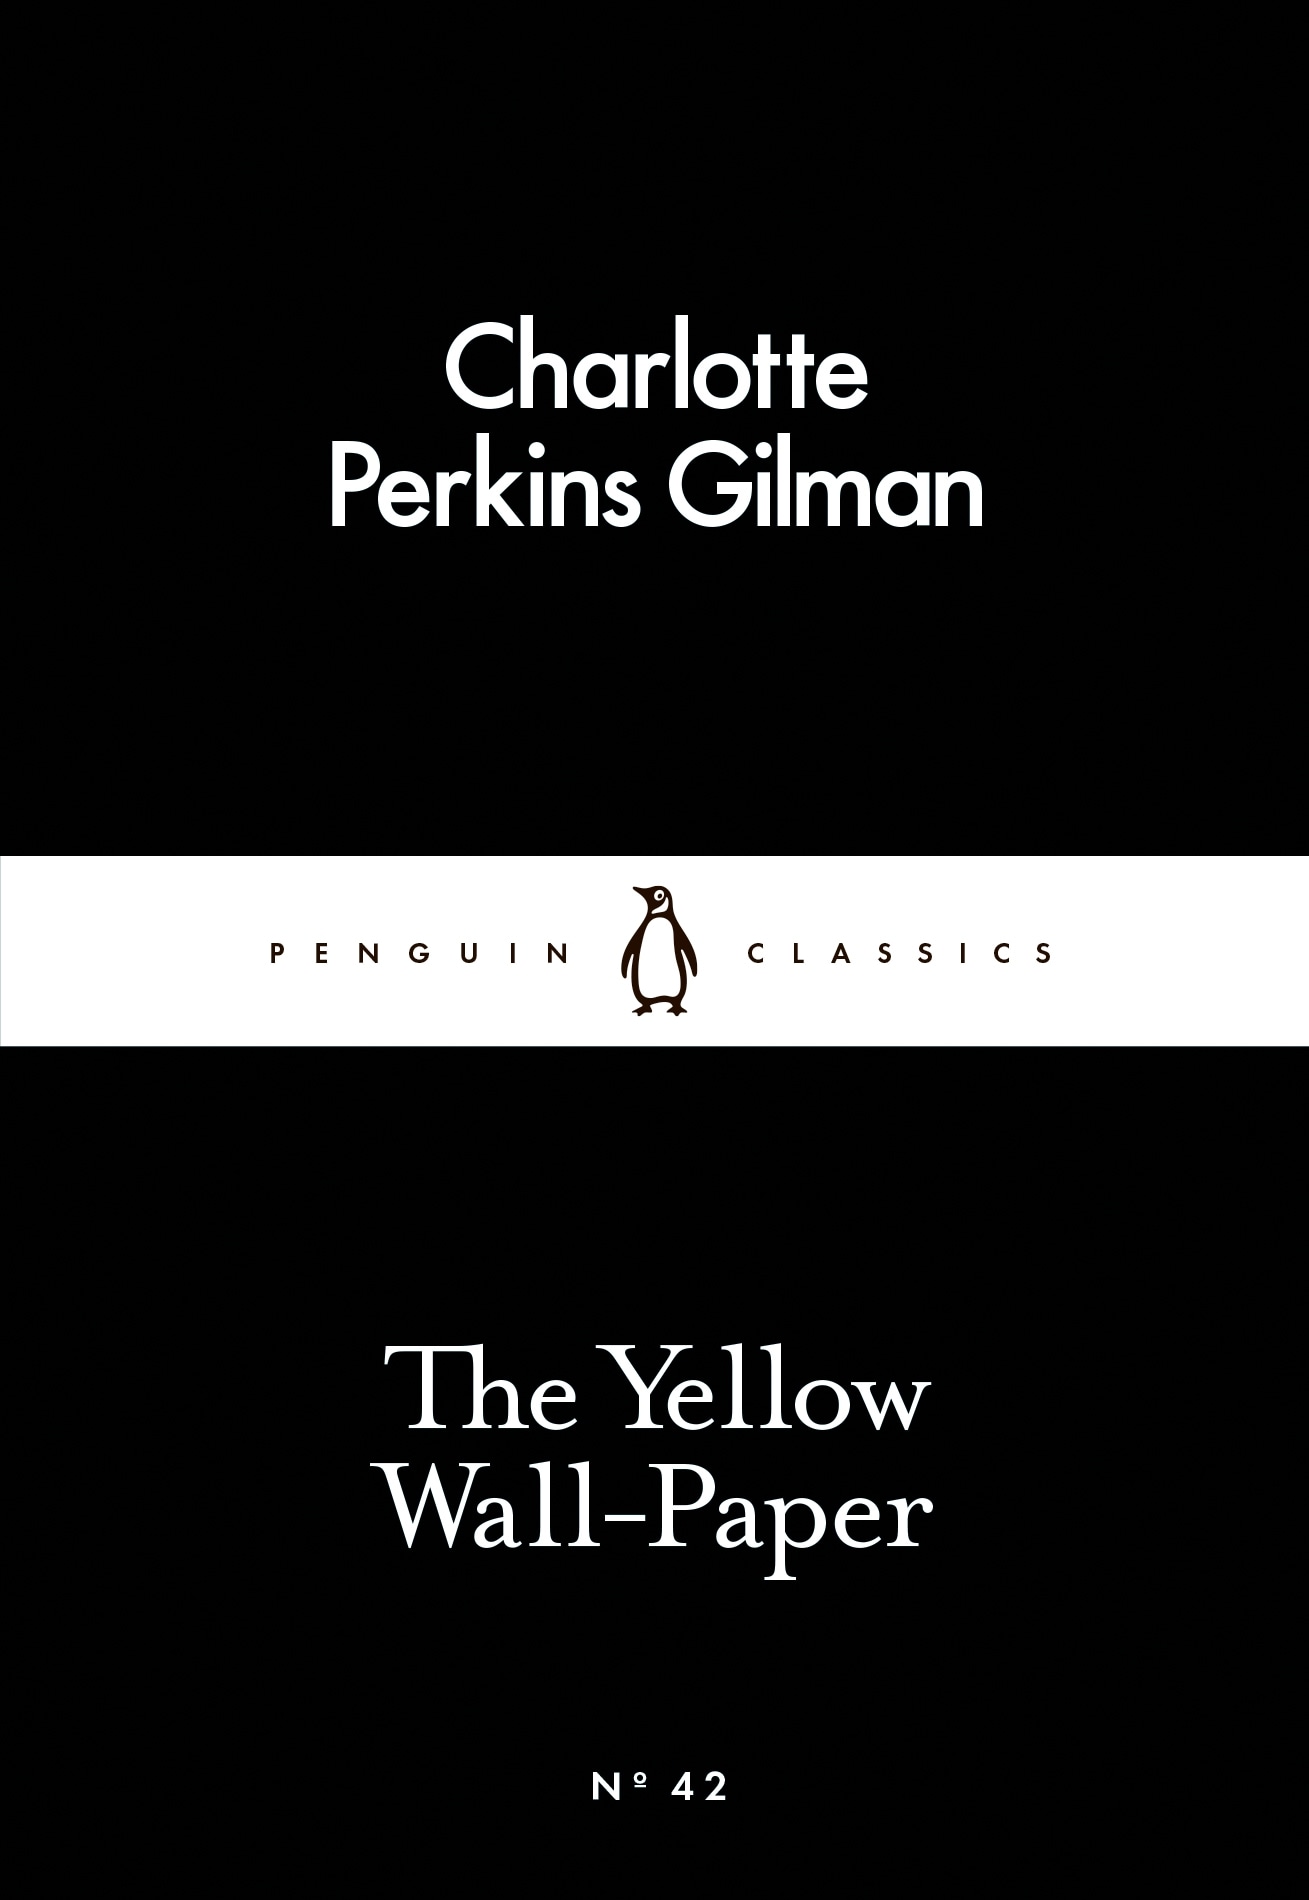 Book “The Yellow Wall-Paper” by Charlotte Perkins Gilman — February 26, 2015